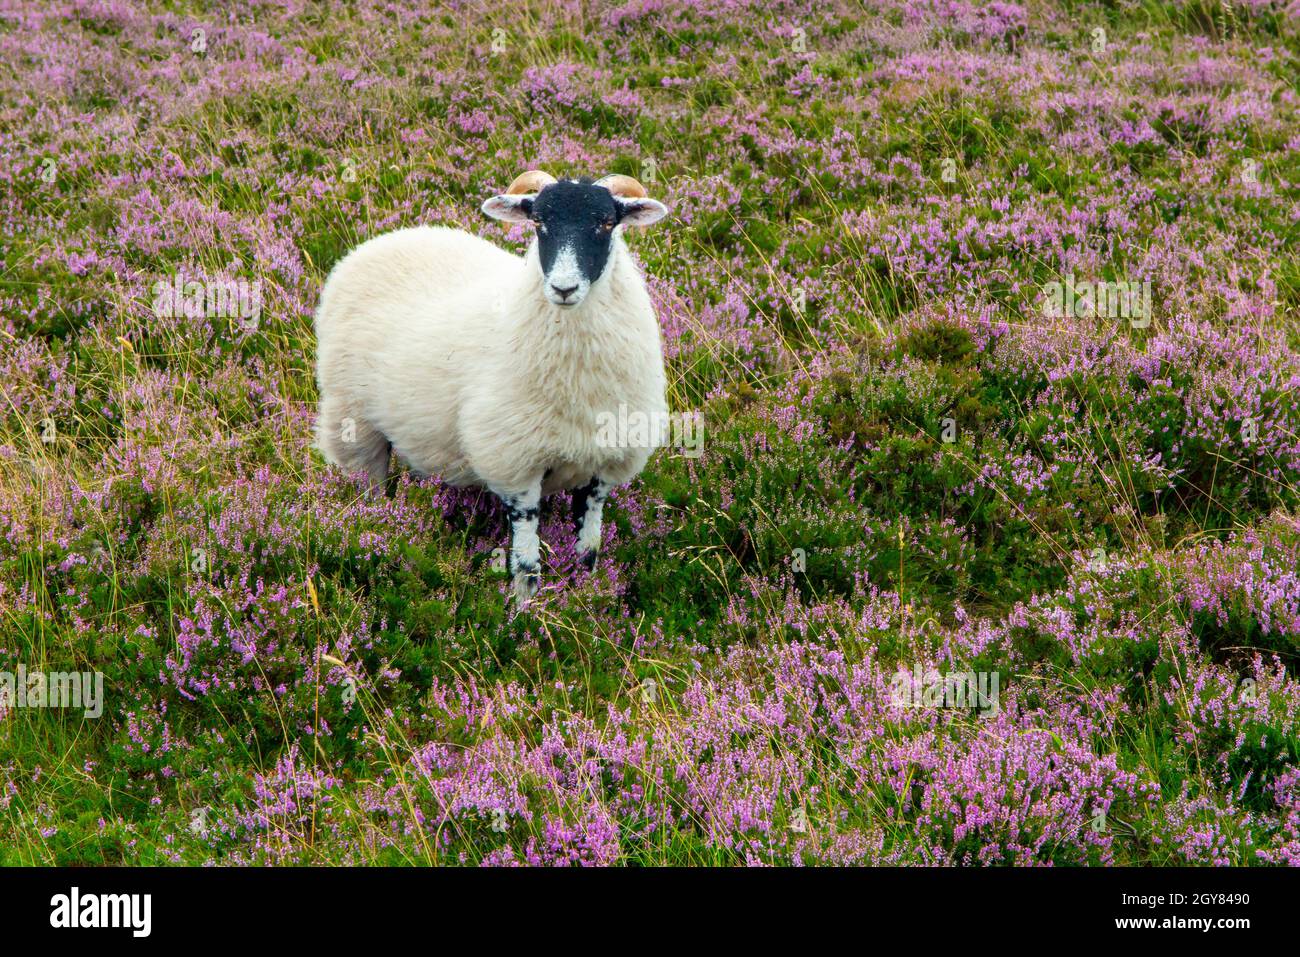 Sheep grazing on moorland with heather in bloom in late summer. Stock Photo